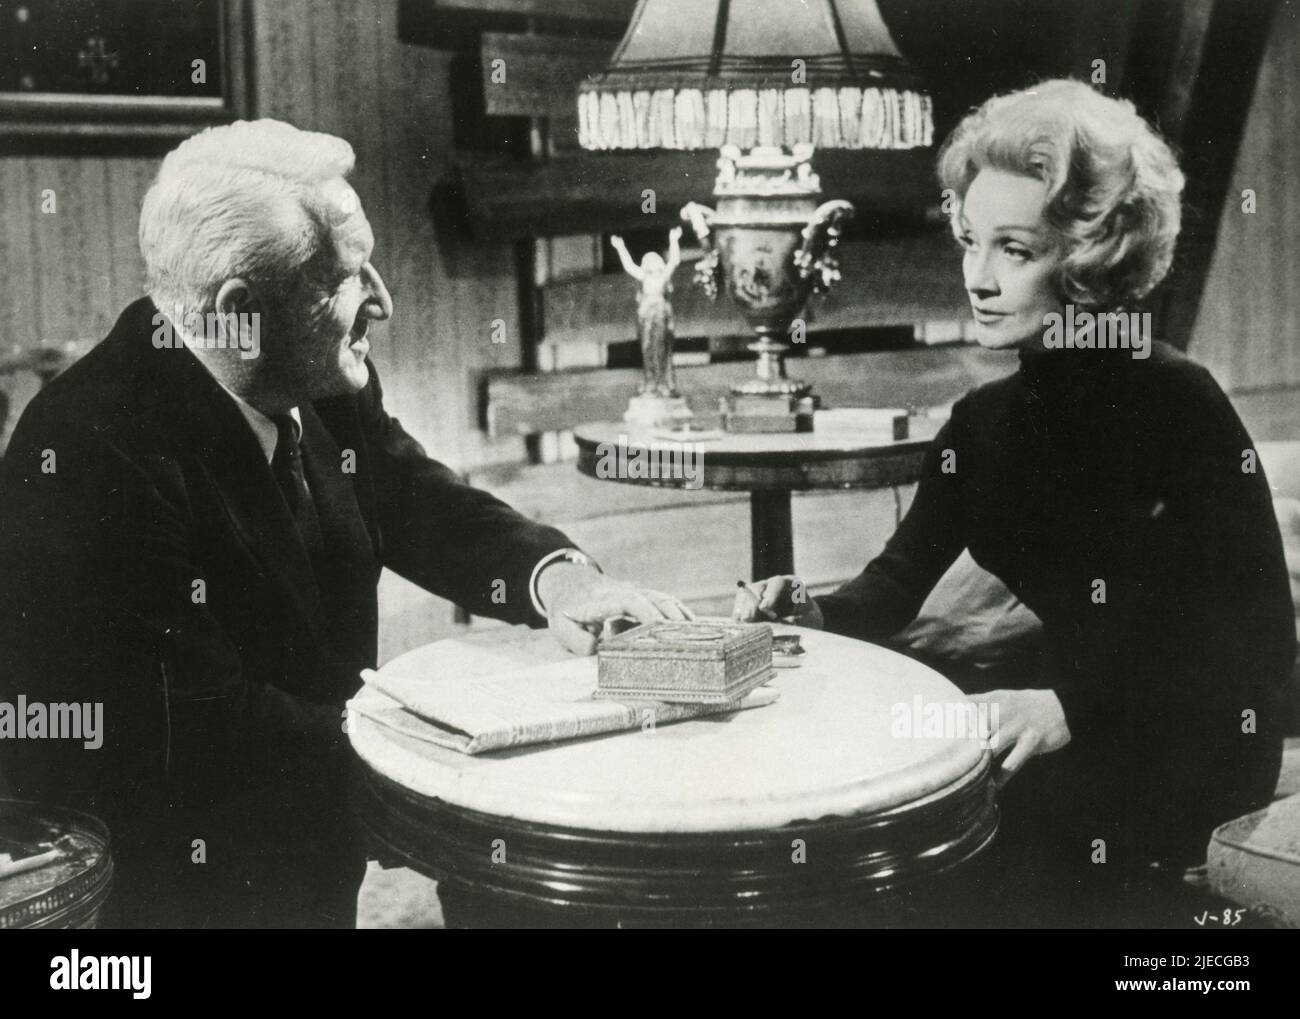 American actor Spencer Tracy and actress Marlene Dietrich in the movie Judgment at Nuremberg, USA 1961 Stock Photo